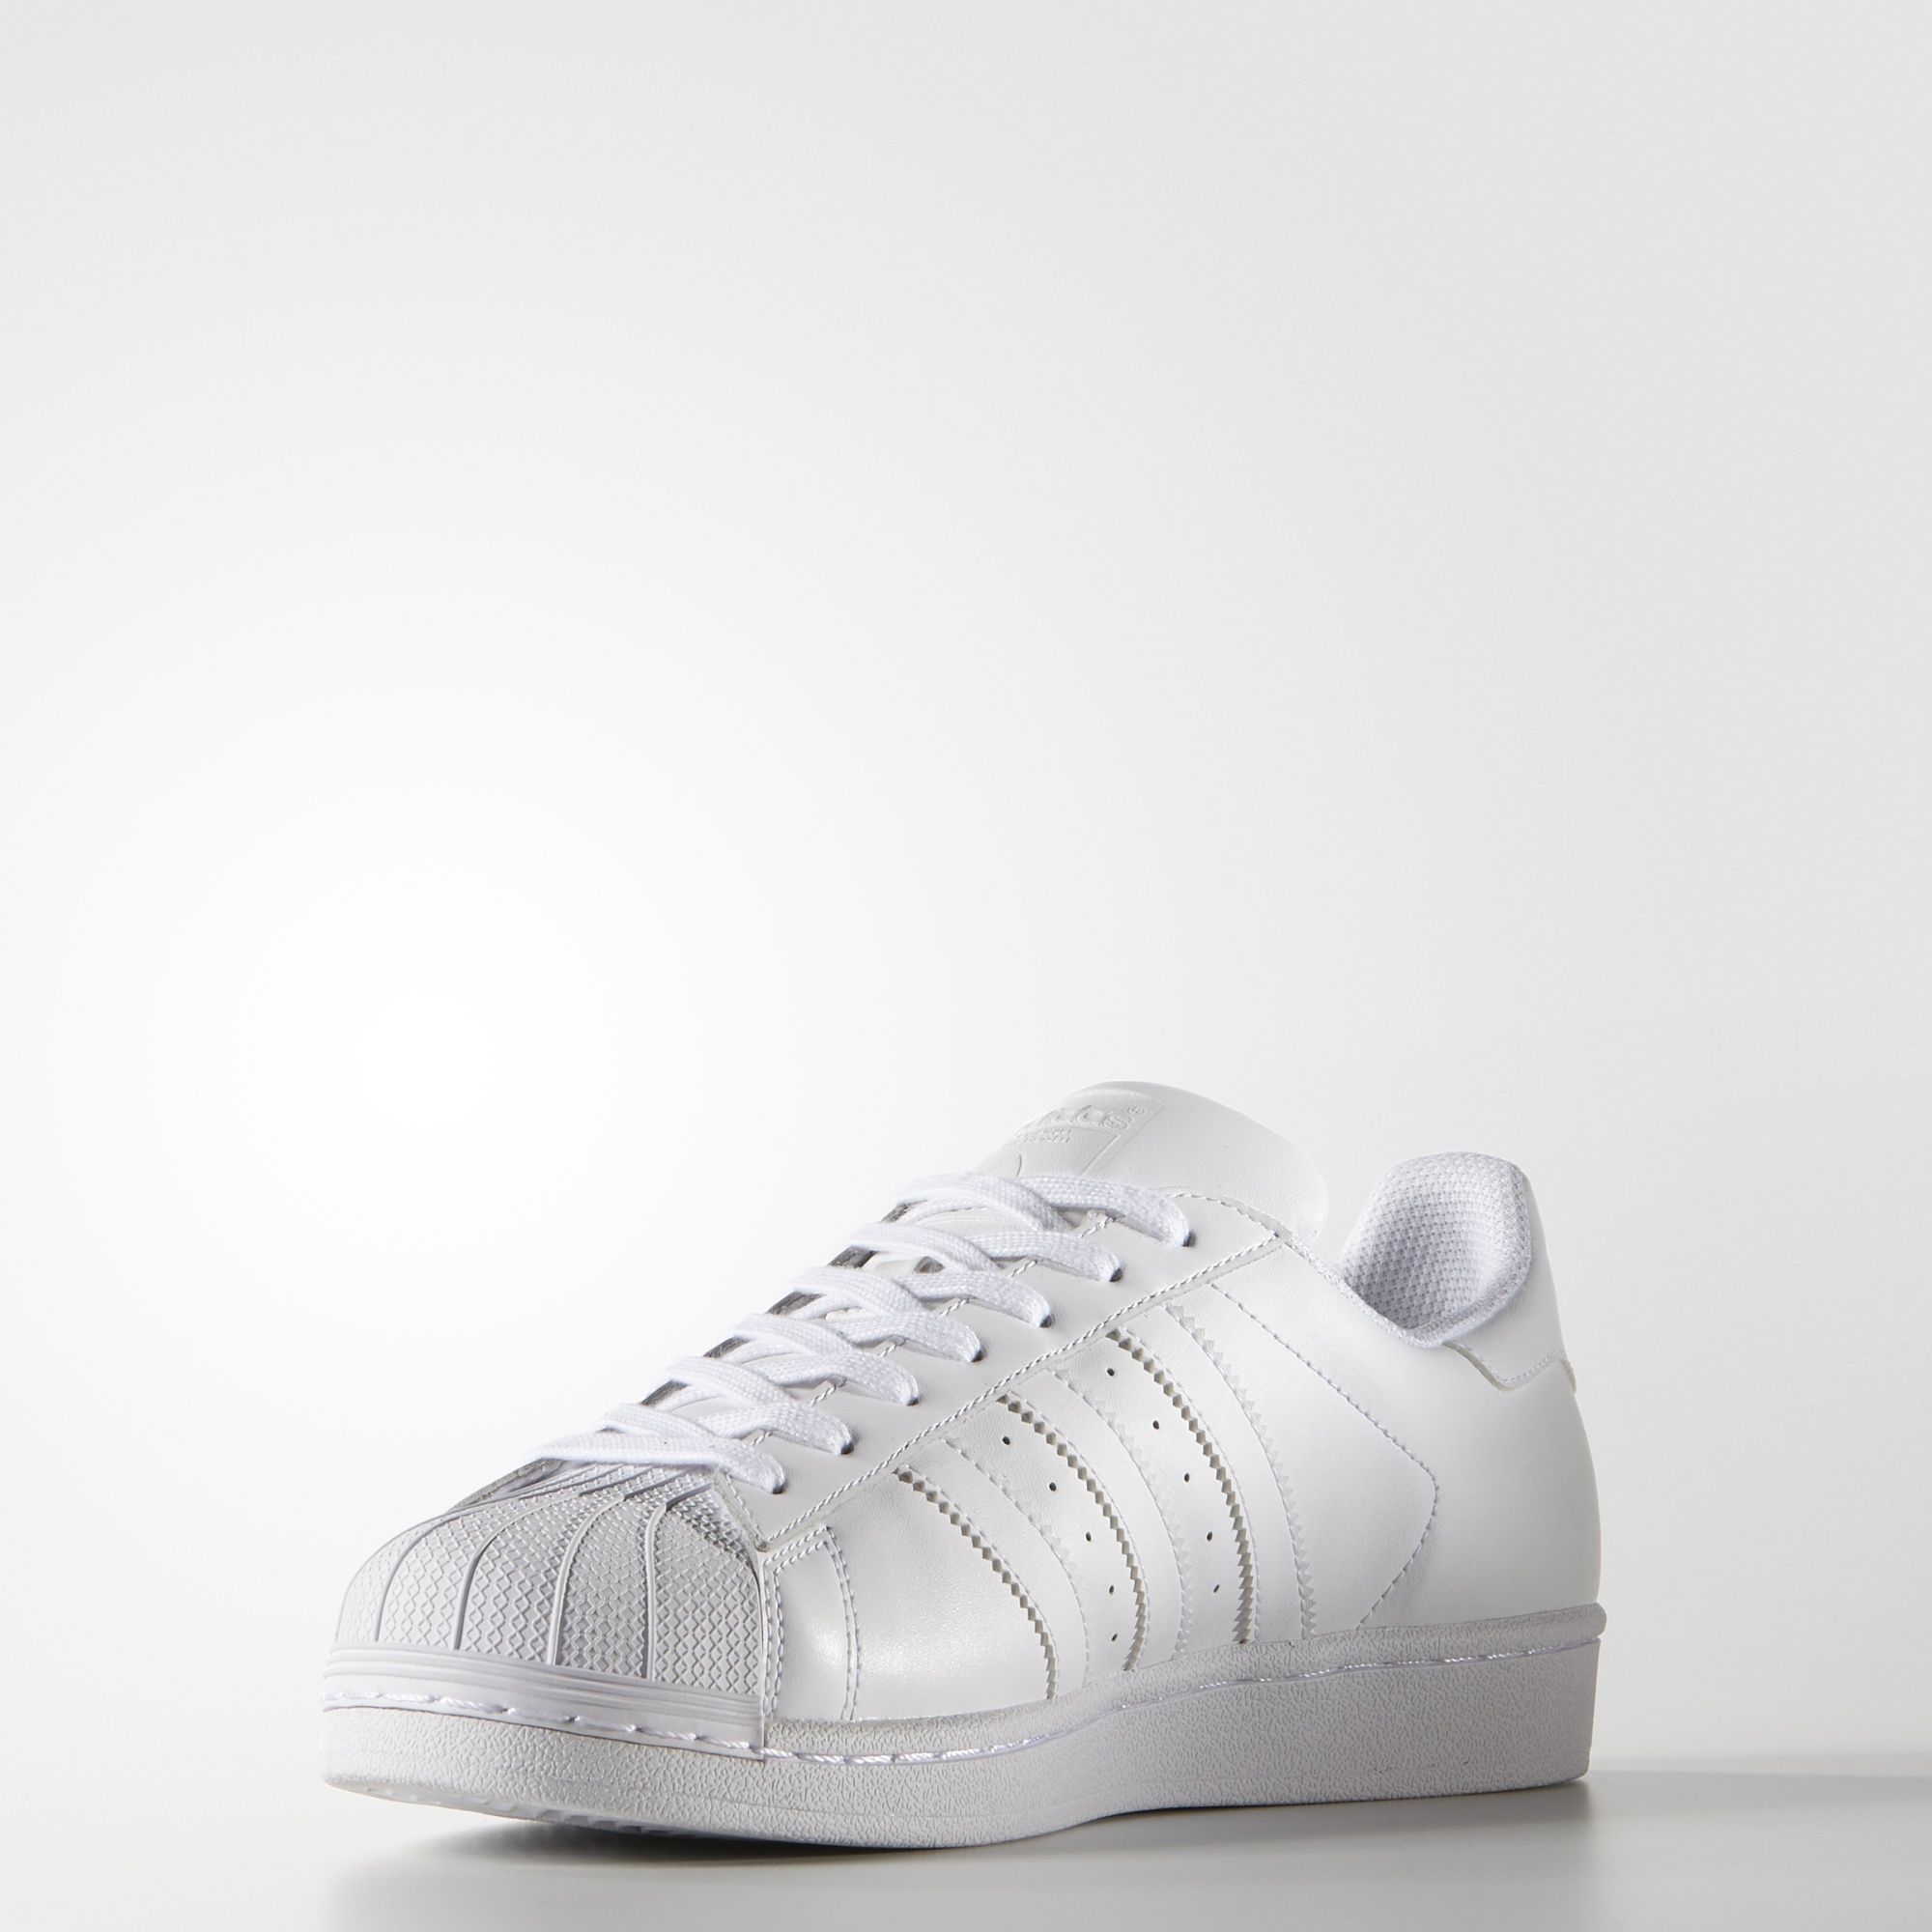 ADIDAS SUPERSTAR FOUNDATION SHOES WHITE - Sports N Sports